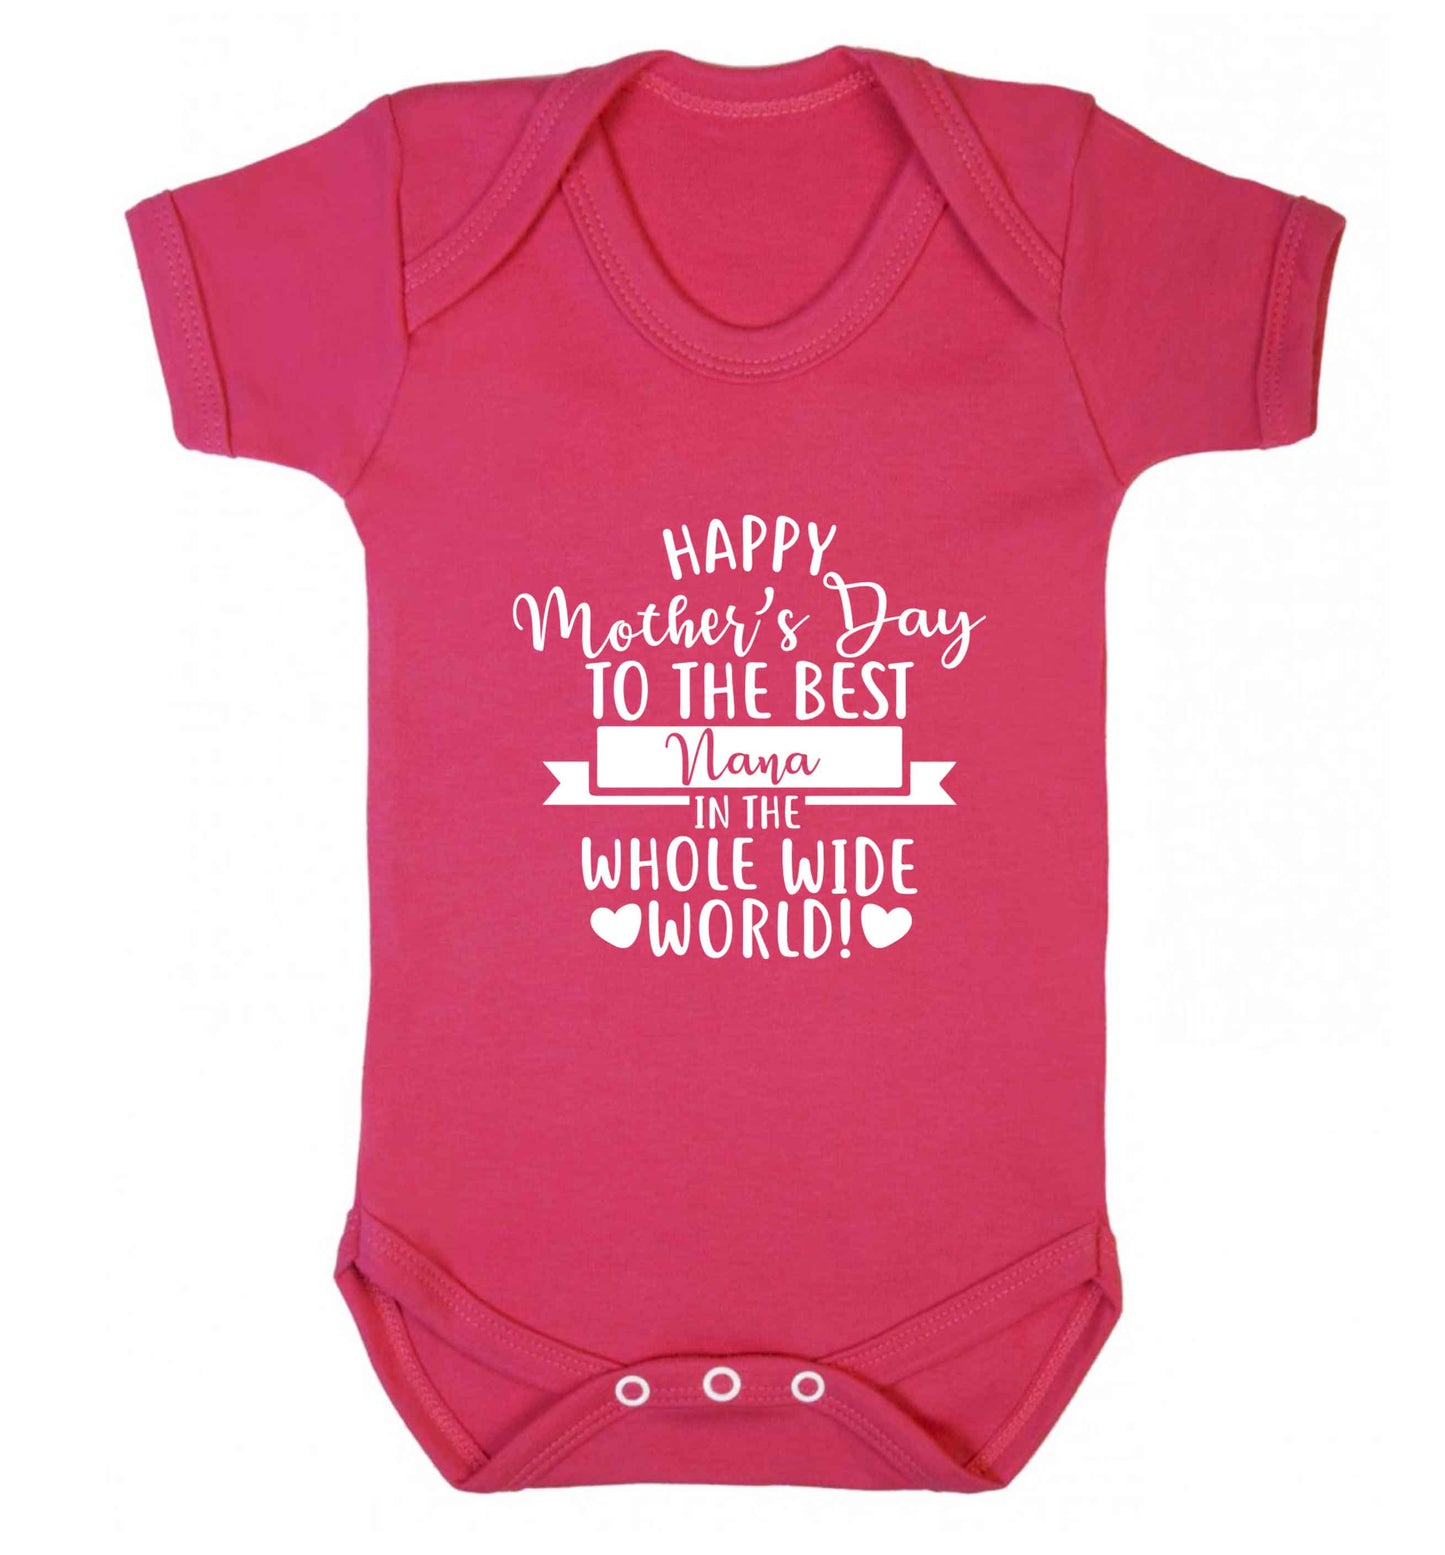 Happy mother's day to the best nana in the world baby vest dark pink 18-24 months